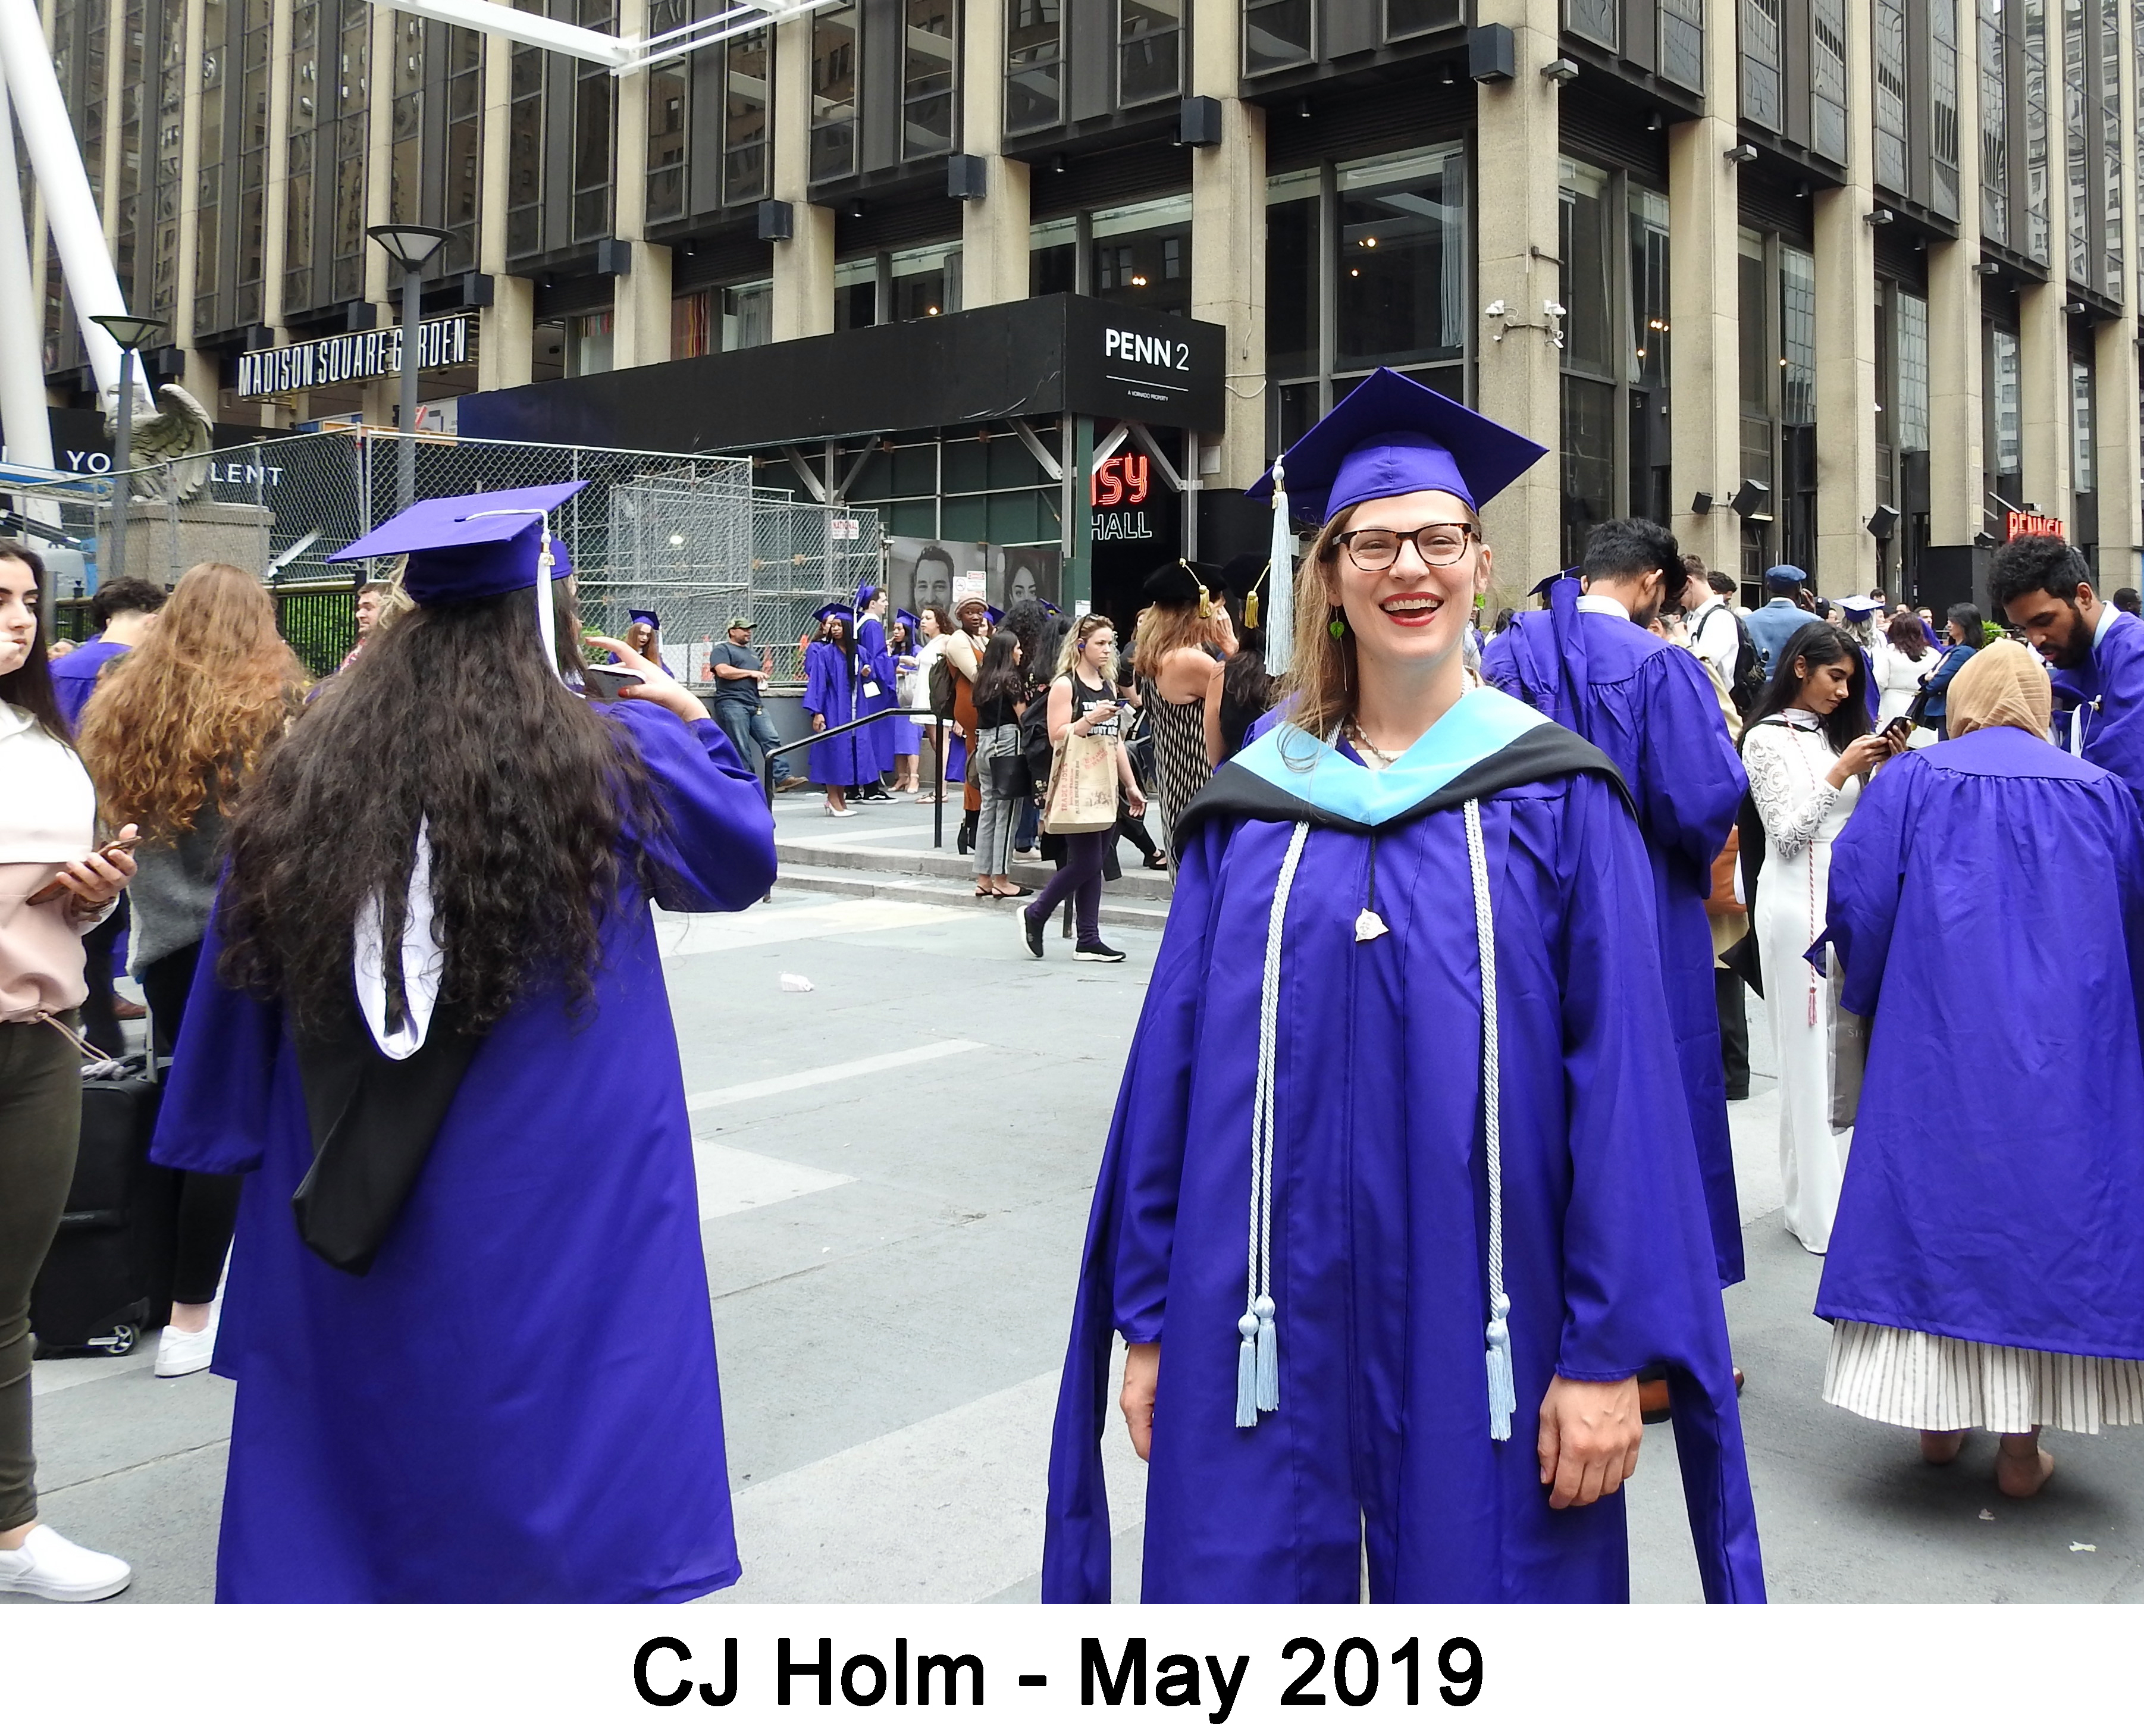 CJ is wearing her purple gown in front of Madison Square Garden